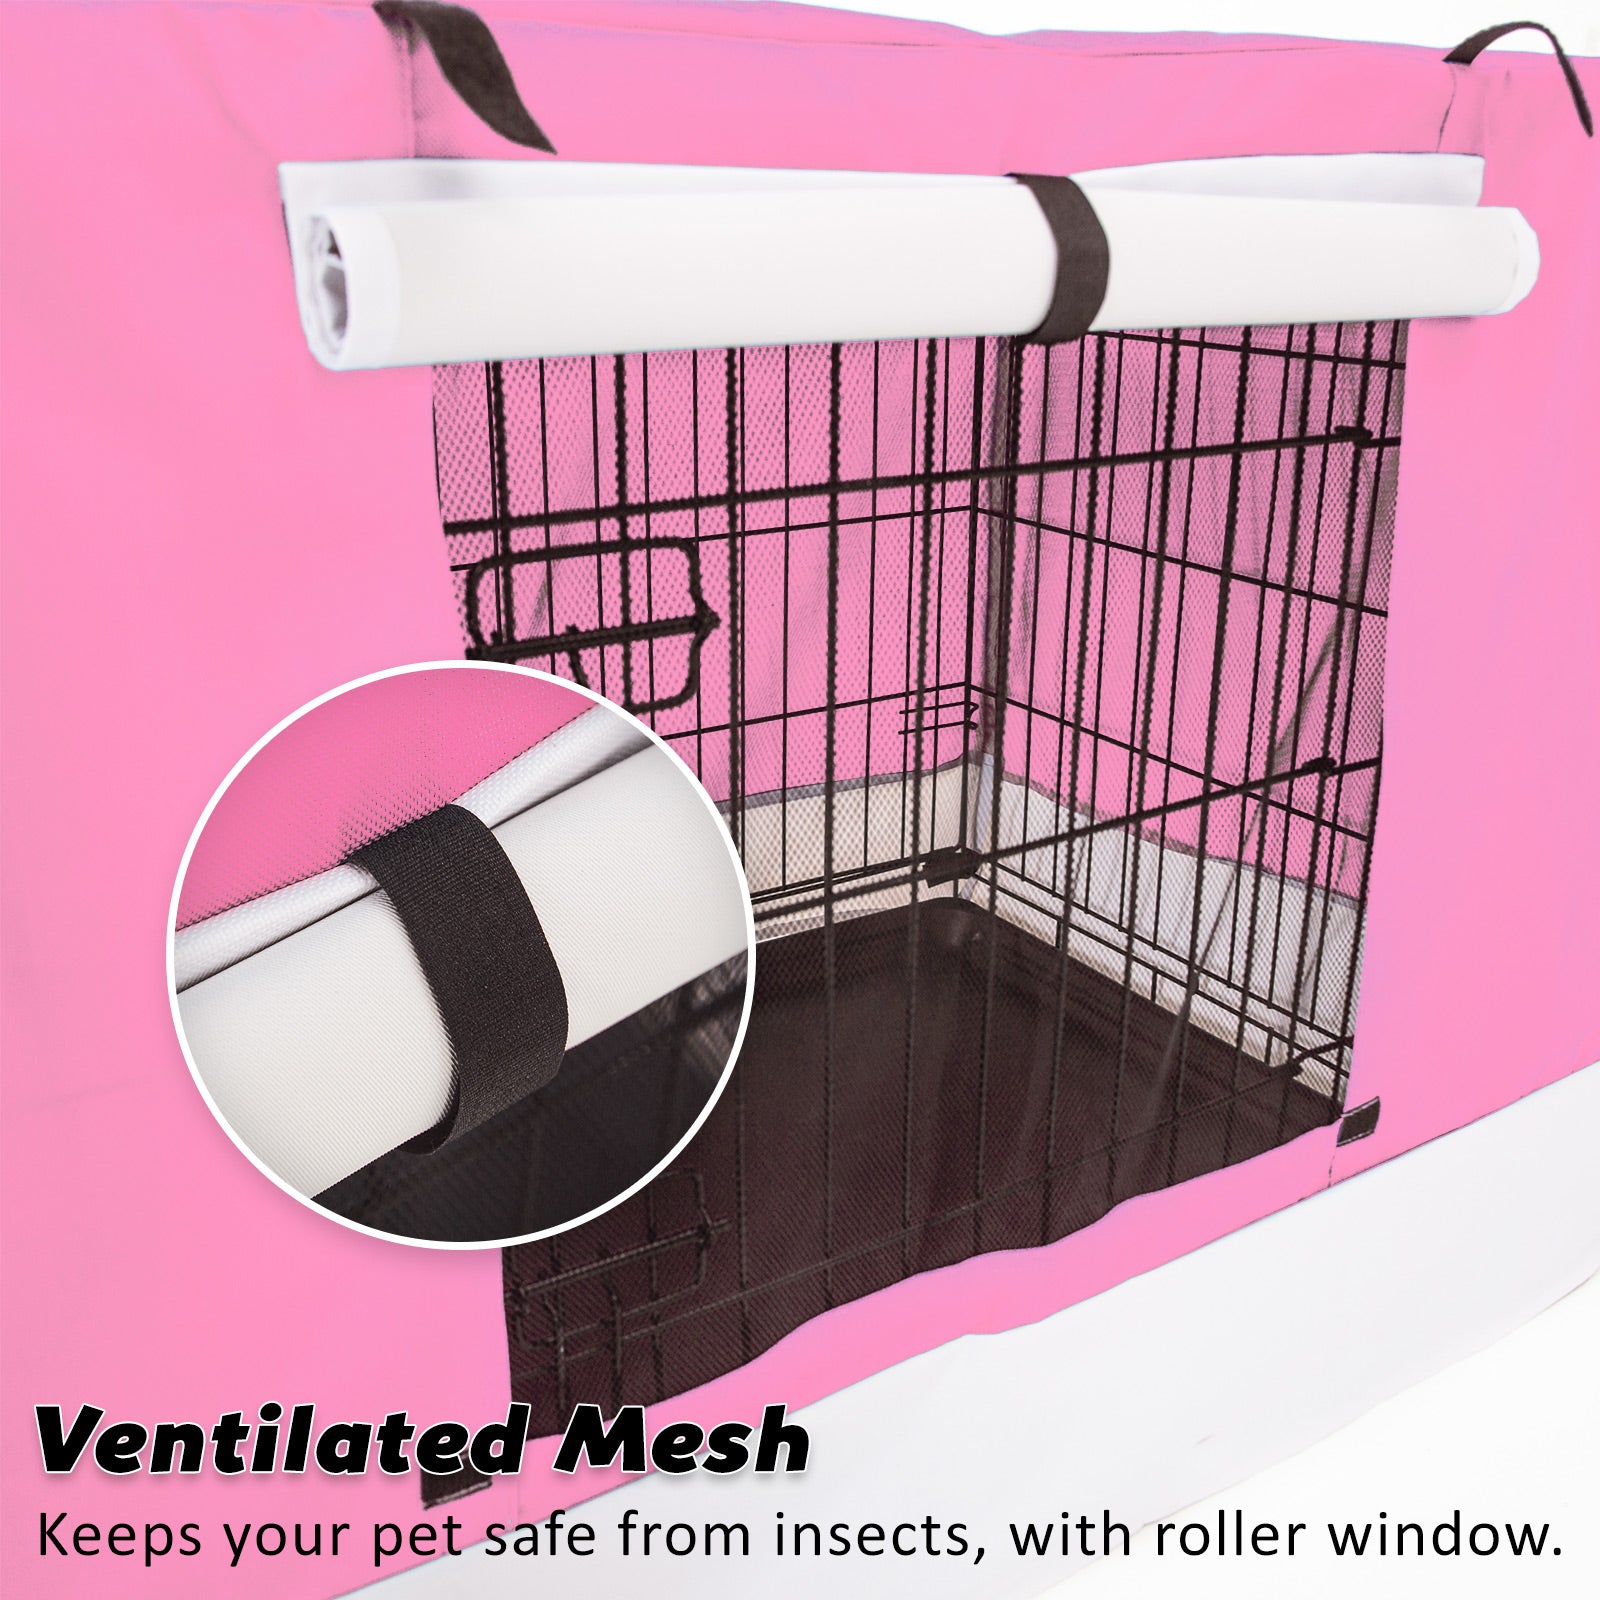 Paw Mate Wire Dog Cage Crate 30in with Tray + Cushion Mat + Pink Cover Combo